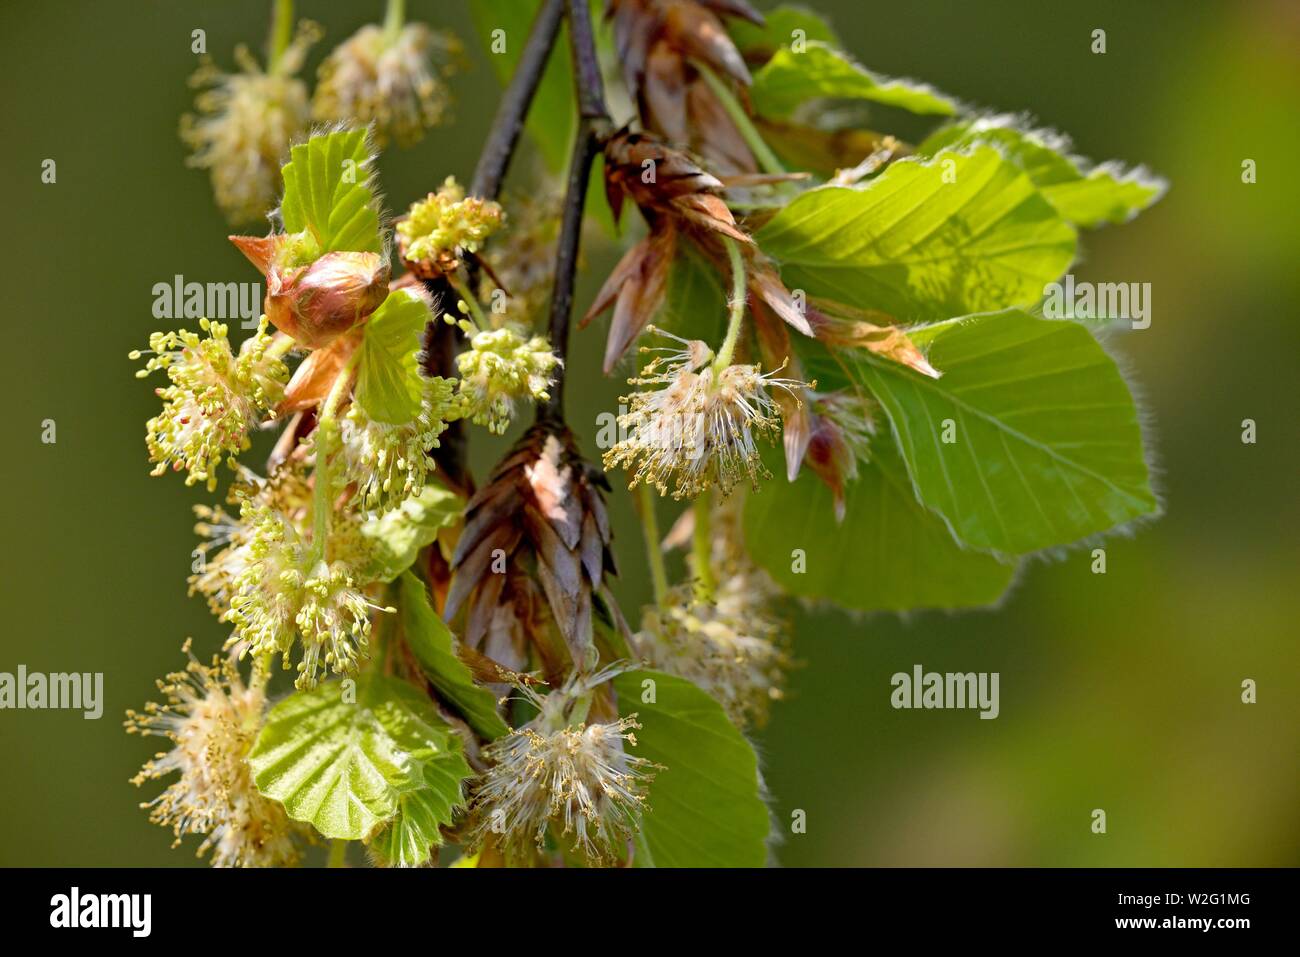 Common beech (Fagus sylvatica), branch with male and female flowers and fresh leaves in spring, North Rhine-Westphalia, Germany Stock Photo